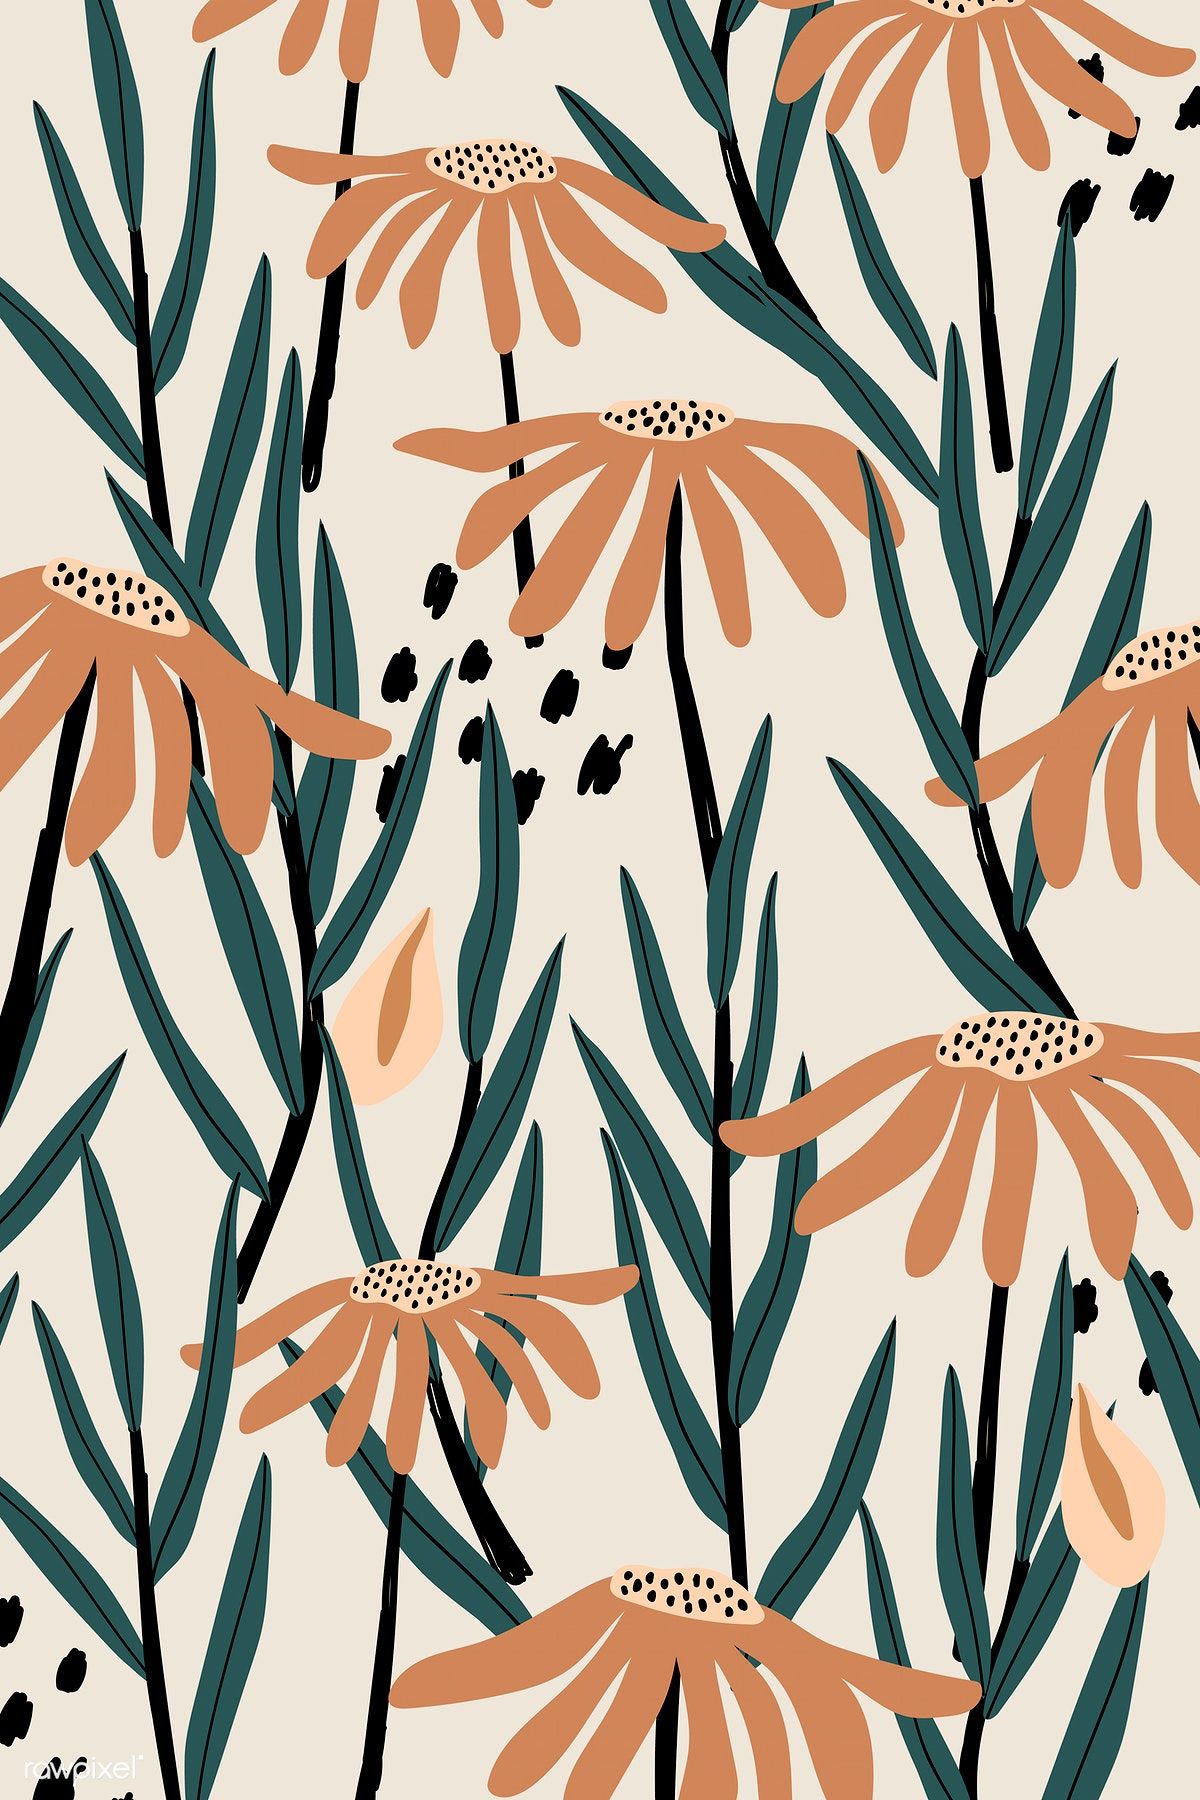 Brown daisy patterned beige background vector | premium image by rawpixel.com / Sicha